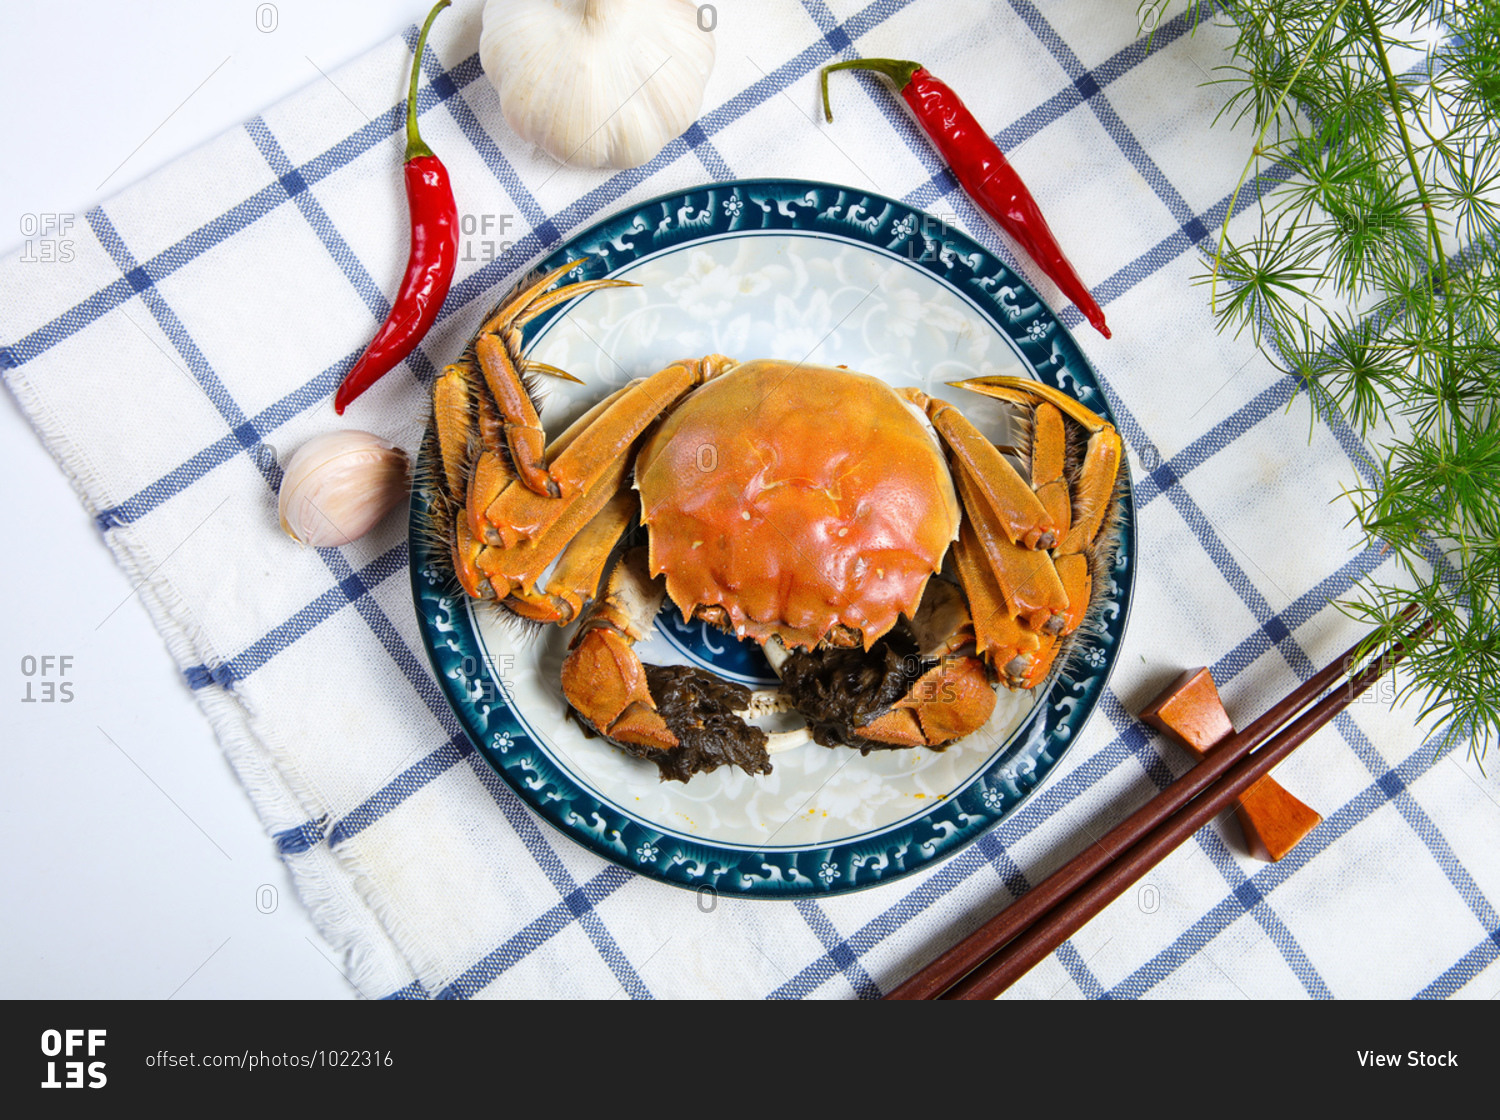 A crab set out on a plate